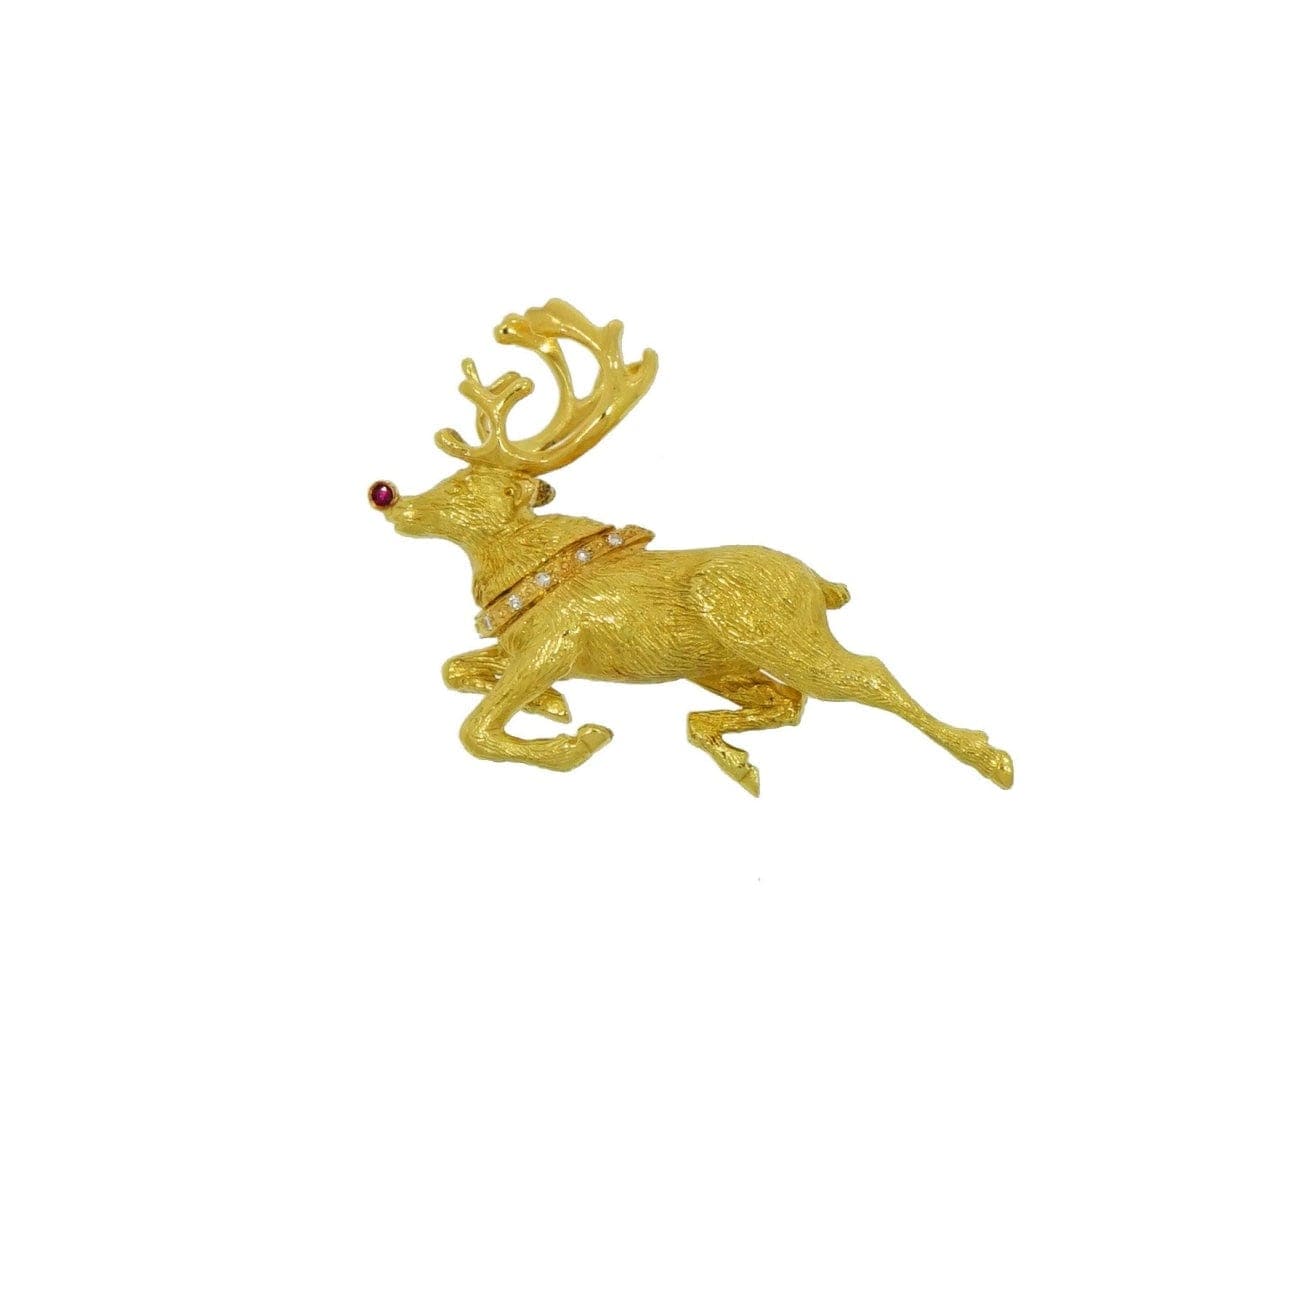 Tiffany & Co. Estate 14K Yellow Gold Stylized Duck Pin – Springer's